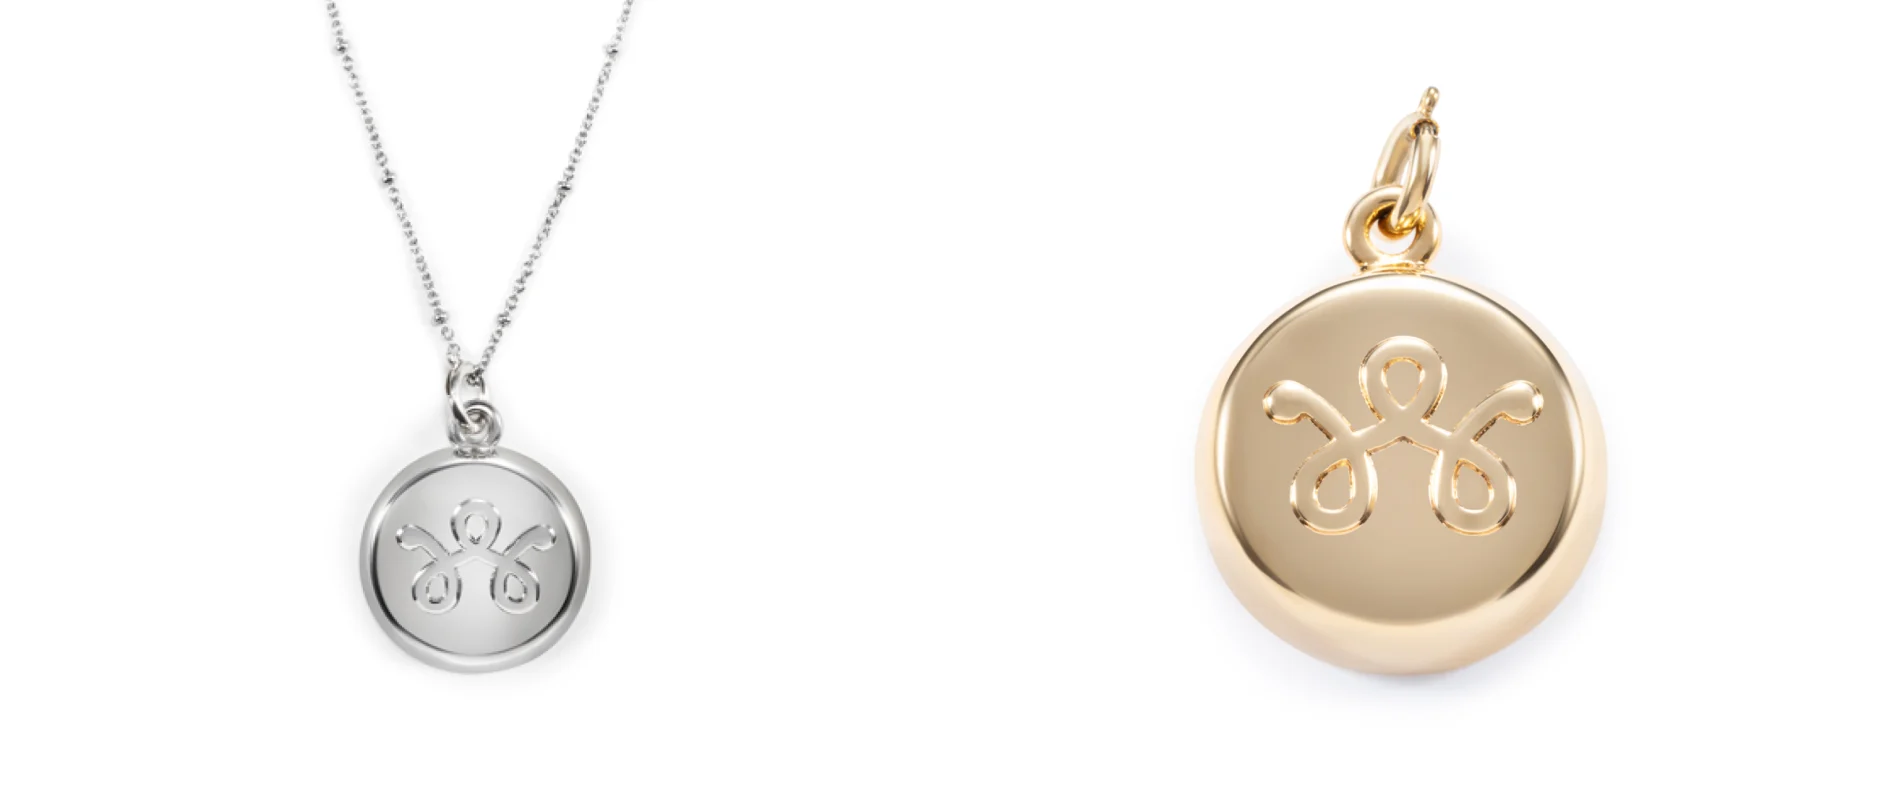 Necklace-charm-side-by-side